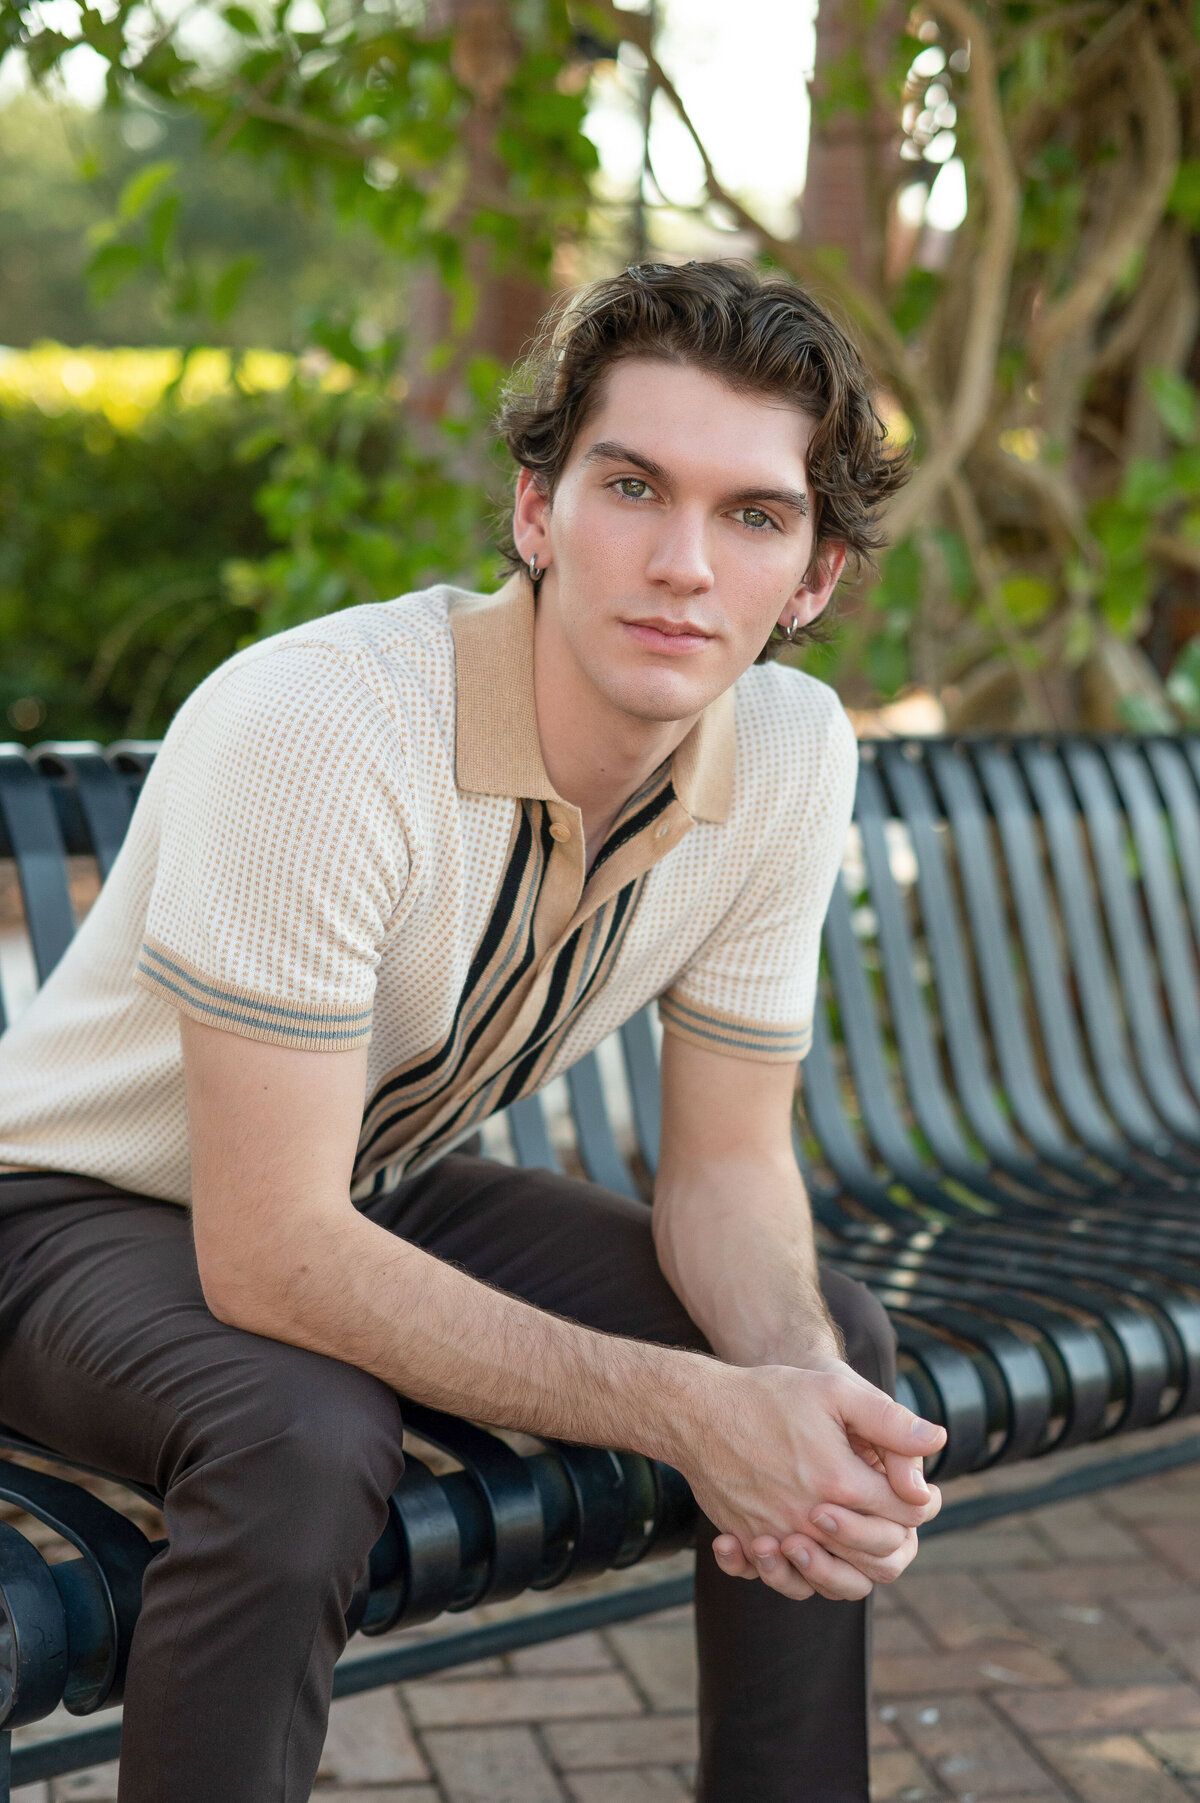 High school senior boy sitting on bench looking at camera with a serious expression.